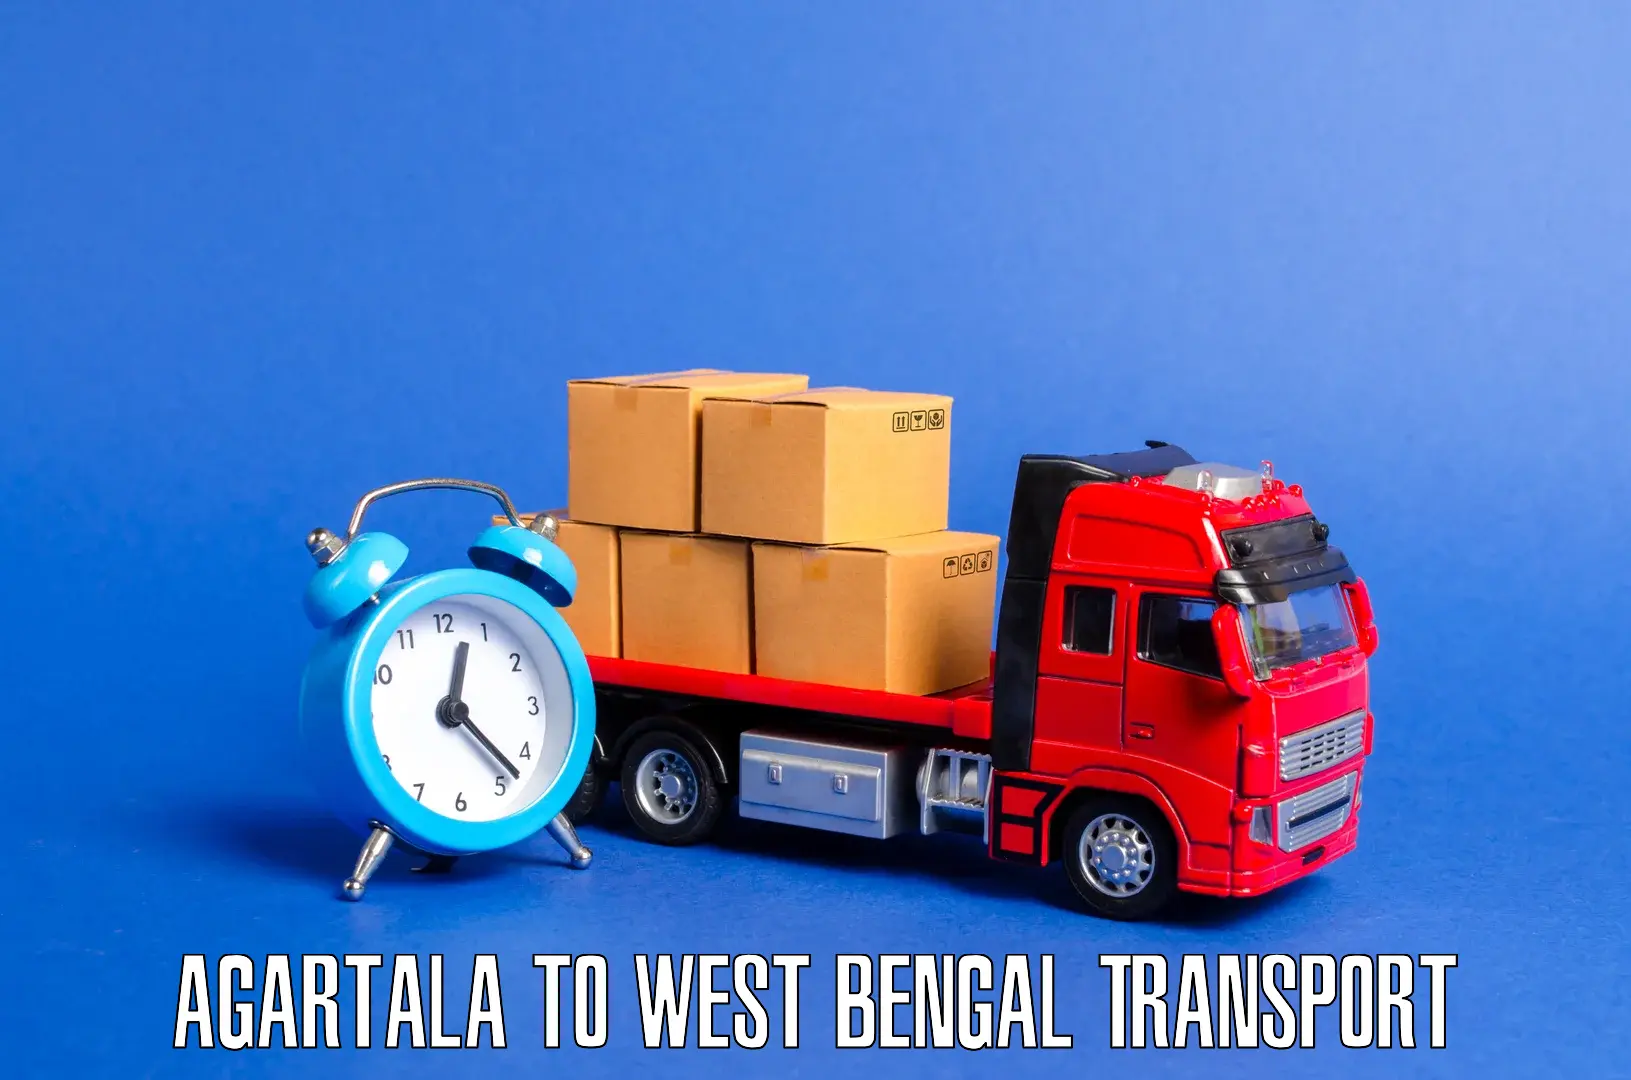 Daily parcel service transport Agartala to Asansol